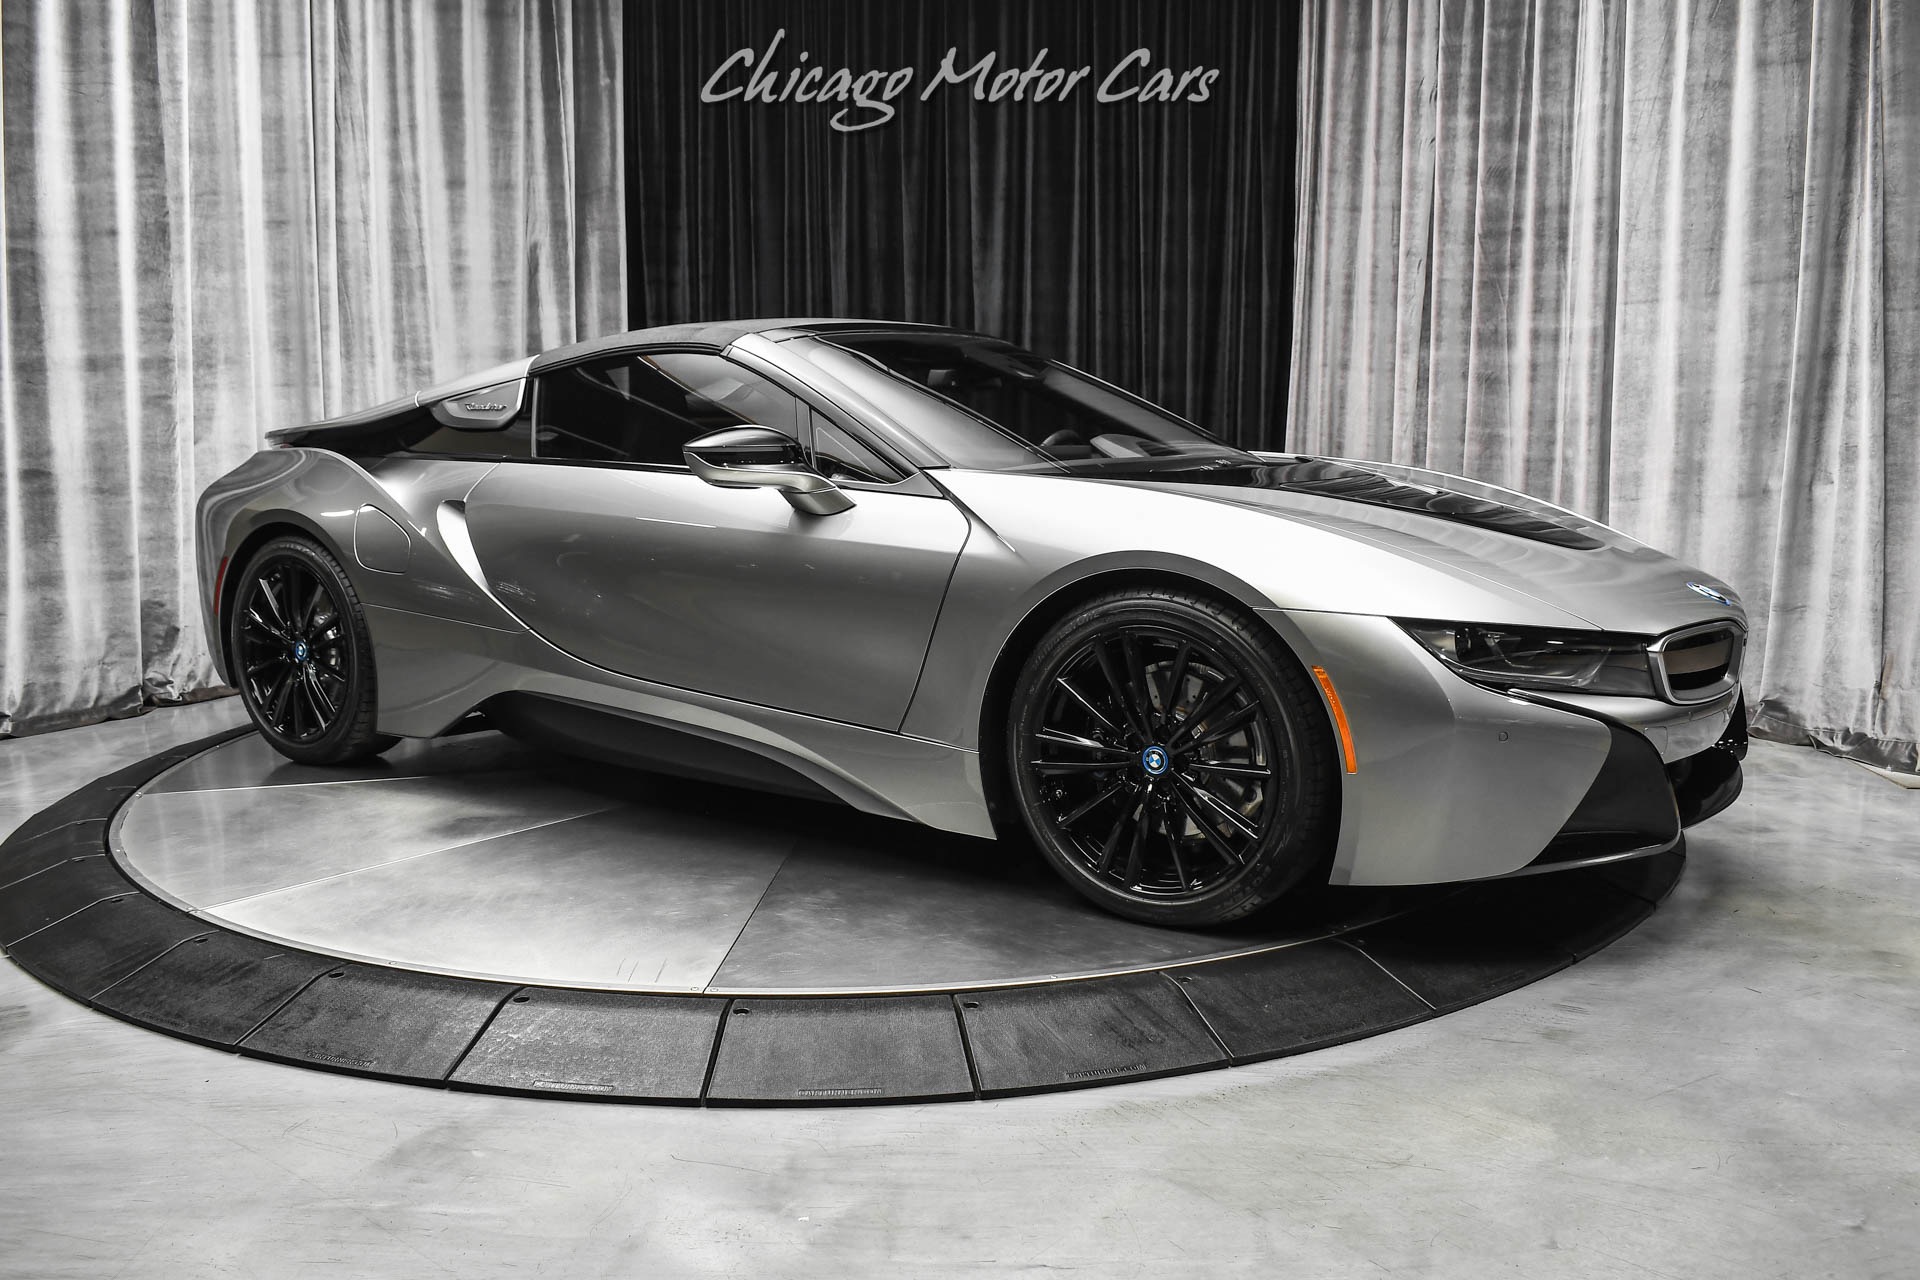 Used 2019 Bmw I8 Roadster Convertible Individual Donington Grey! Bmw  Laserlight! Low Miles! For Sale (Special Pricing) | Chicago Motor Cars  Stock #19882B